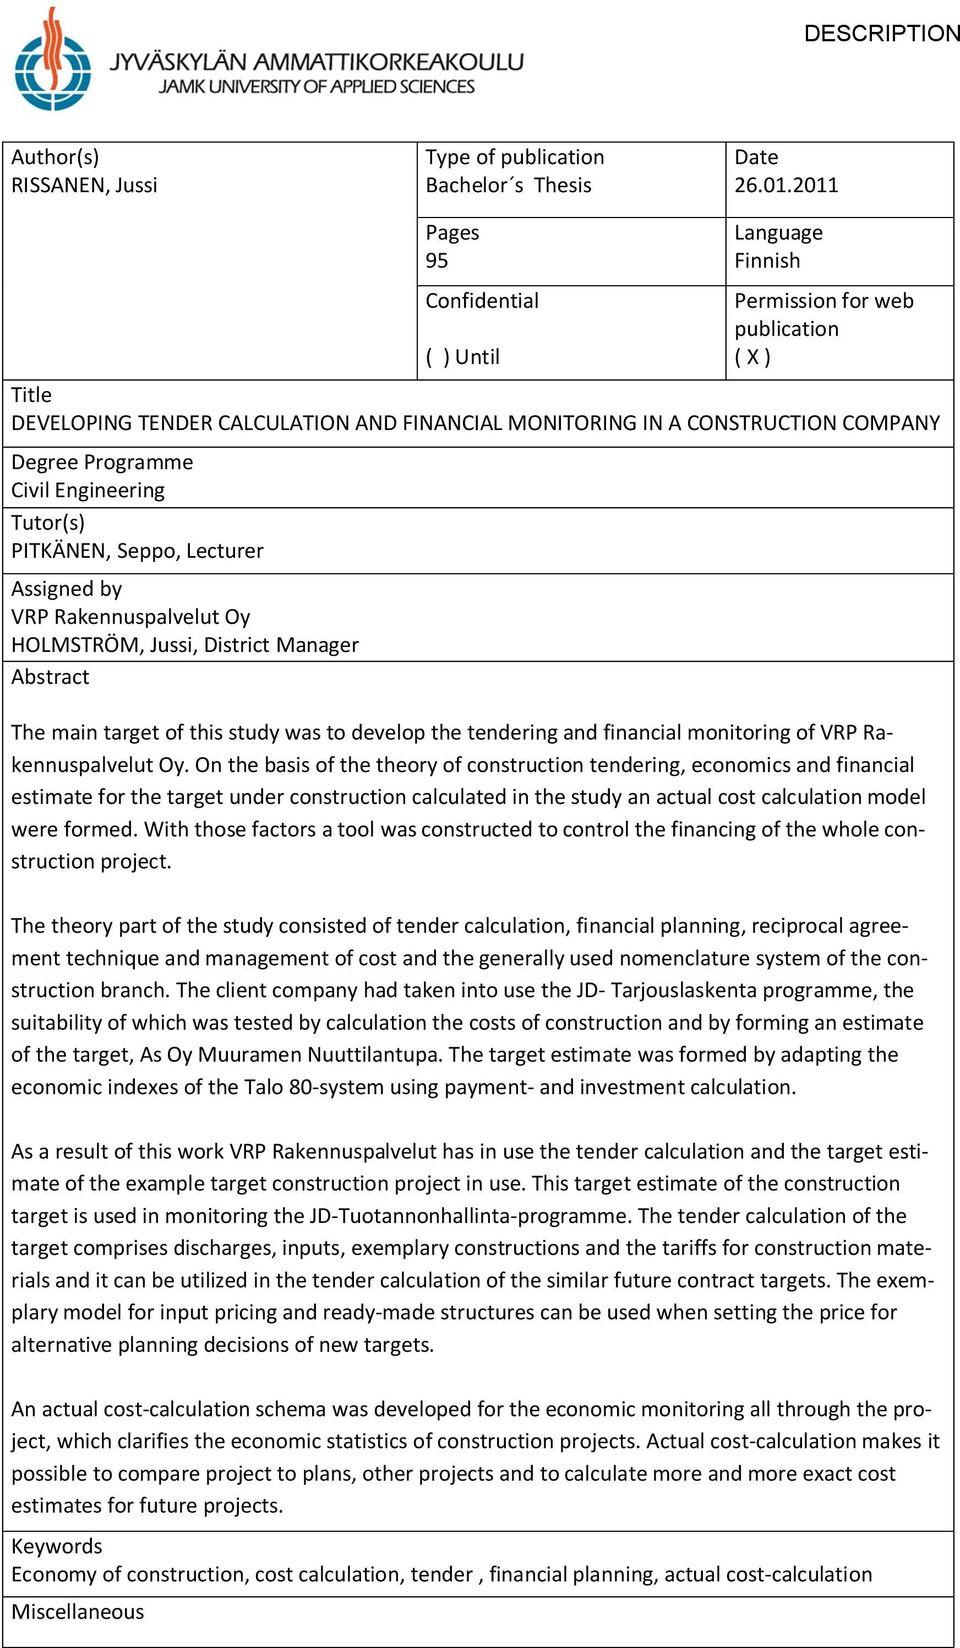 Civil Engineering Tutor(s) PITKÄNEN, Seppo, Lecturer Assigned by VRP Rakennuspalvelut Oy HOLMSTRÖM, Jussi, District Manager Abstract The main target of this study was to develop the tendering and